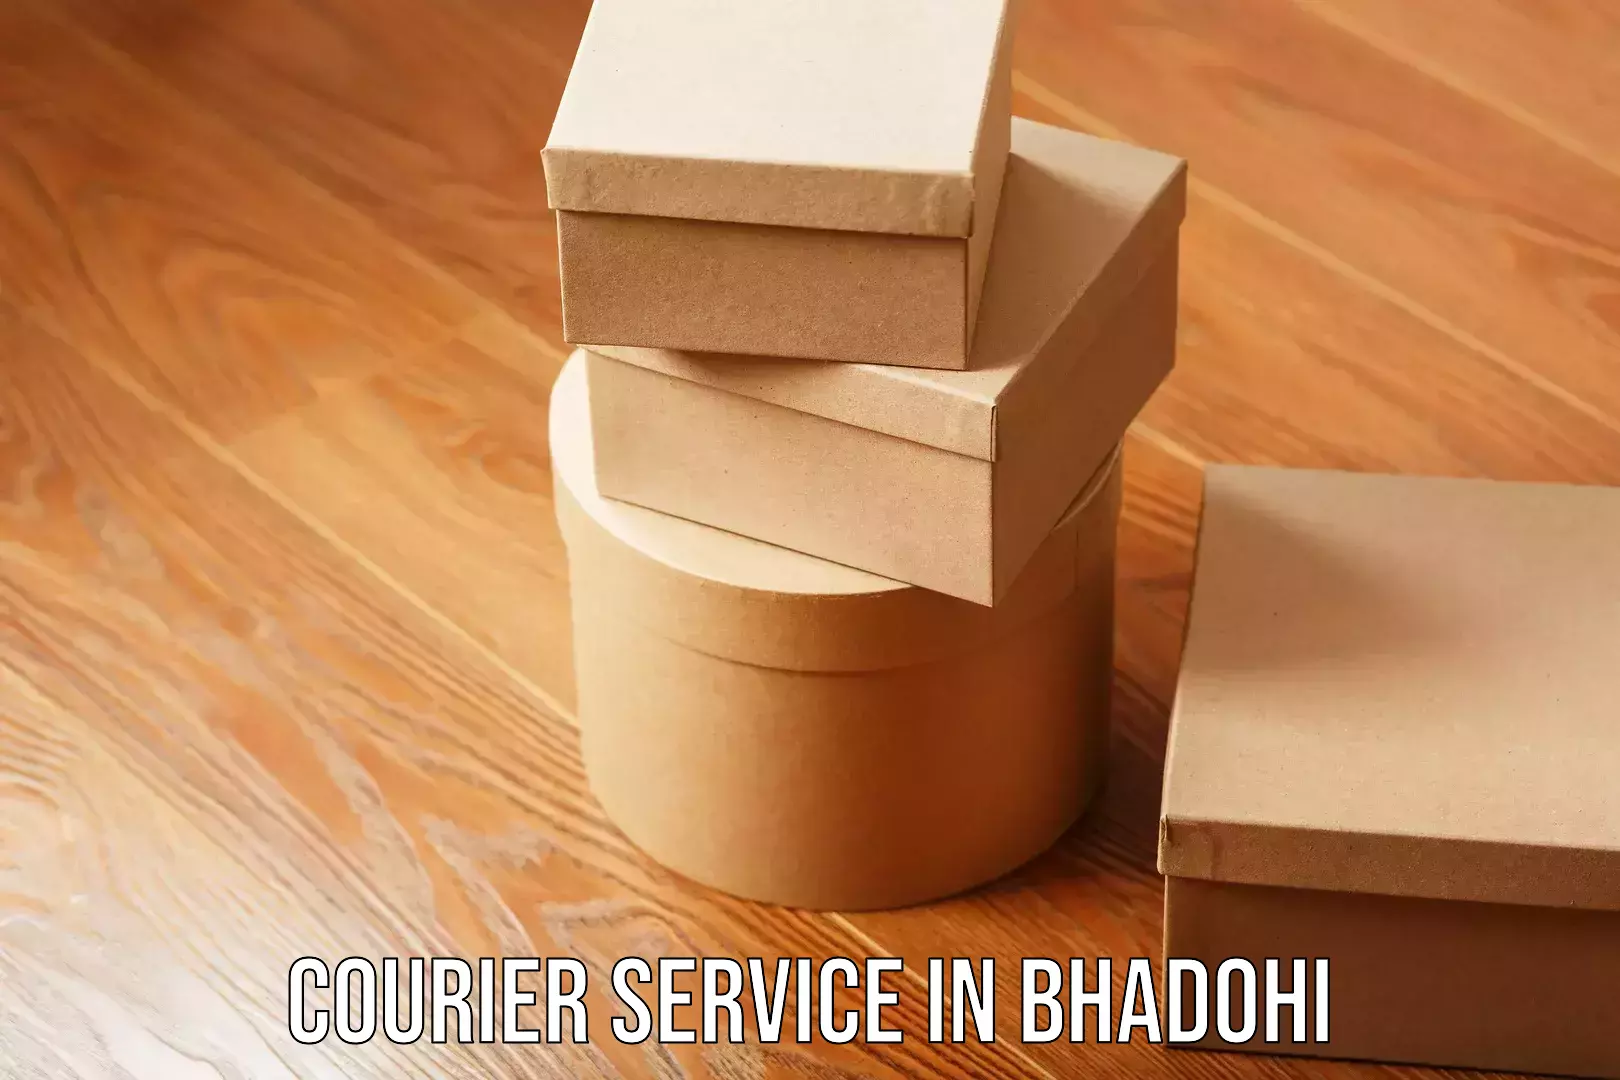 Express package services in Bhadohi